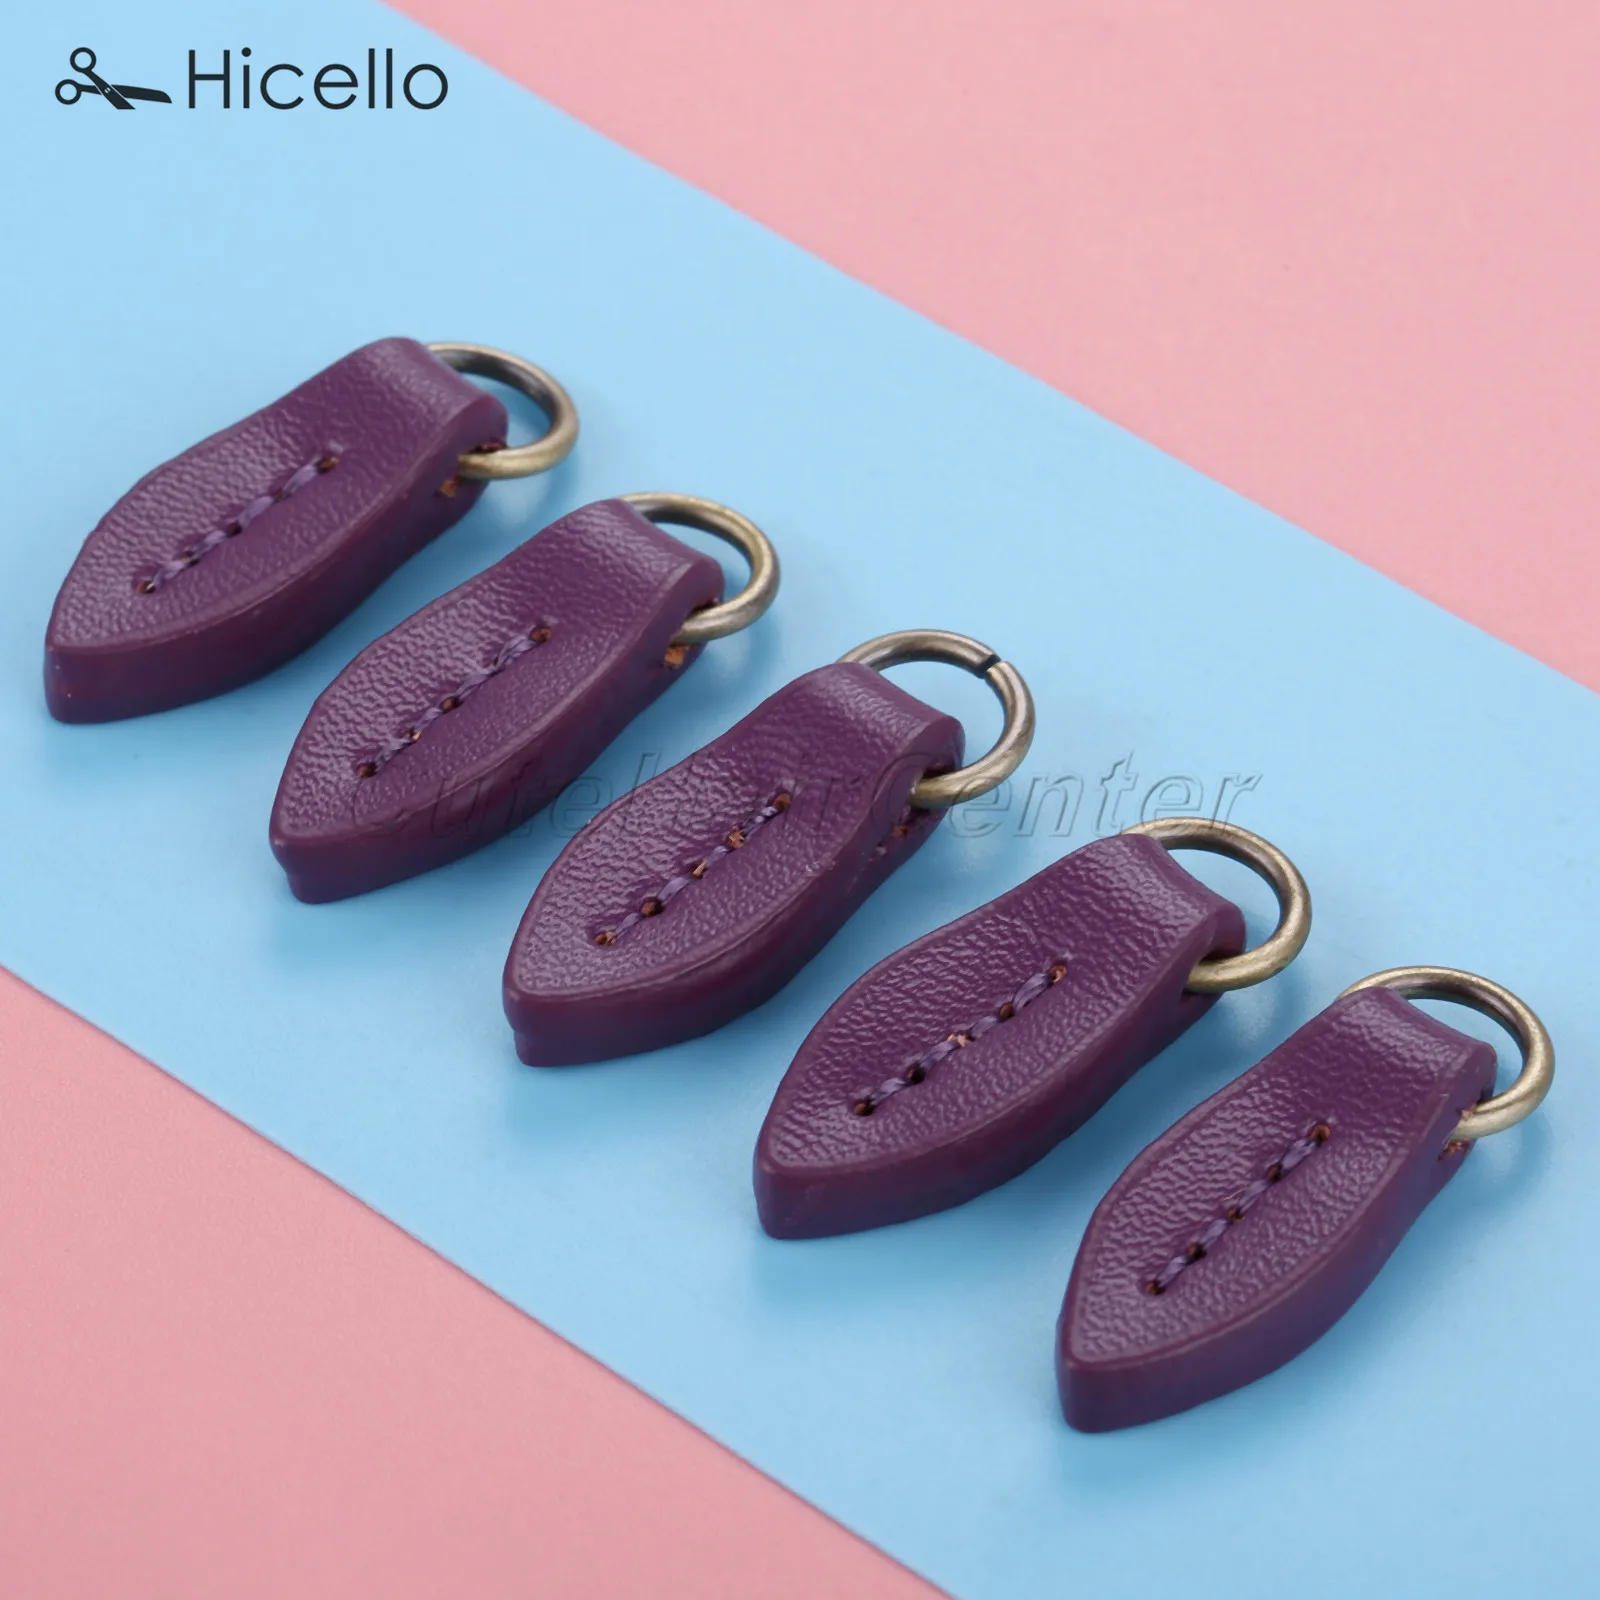 5pcs/lot Zipper Pullers Leaf Shape Pull head Replacement Sewing Craft Fasteners Leather Alloy pendant 33*11mm colorful Hicello - Цвет: Purple